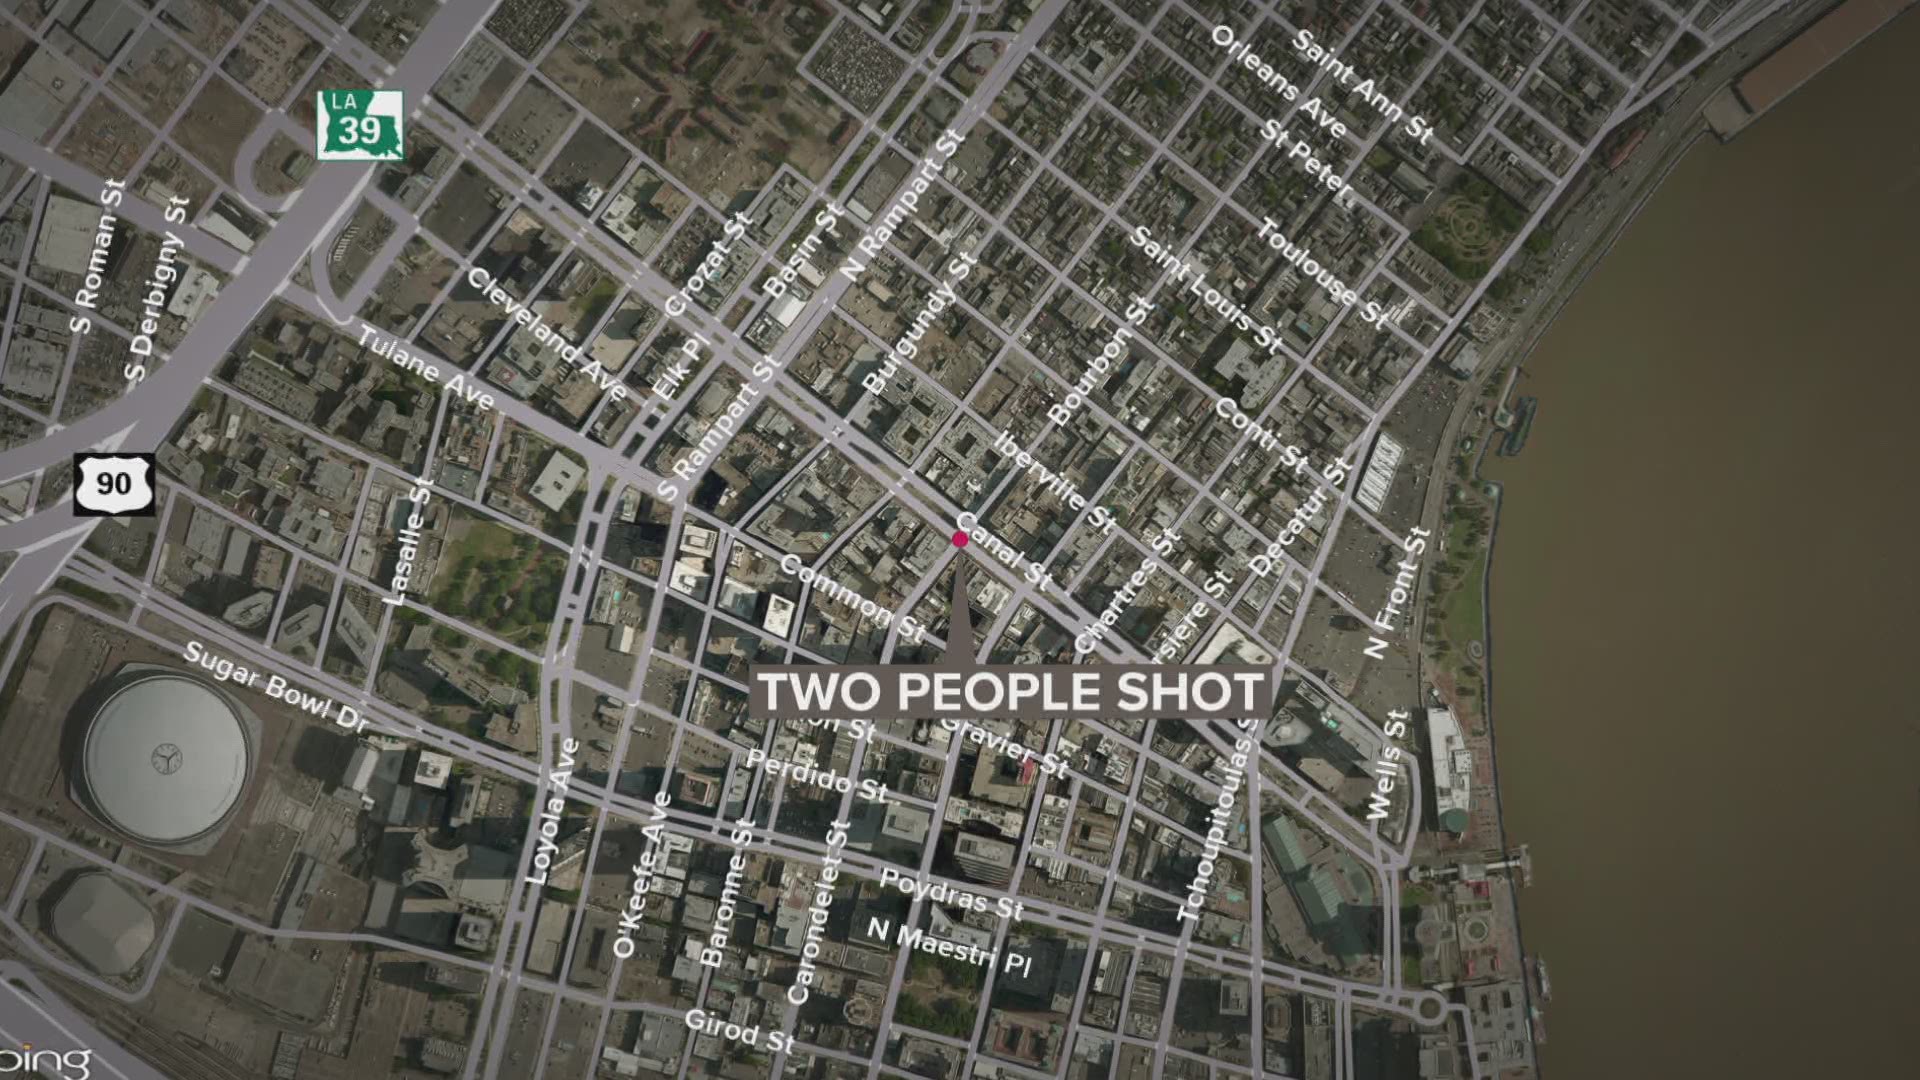 A violent night before Easter has NOPD investigating three shootings and one homicide.